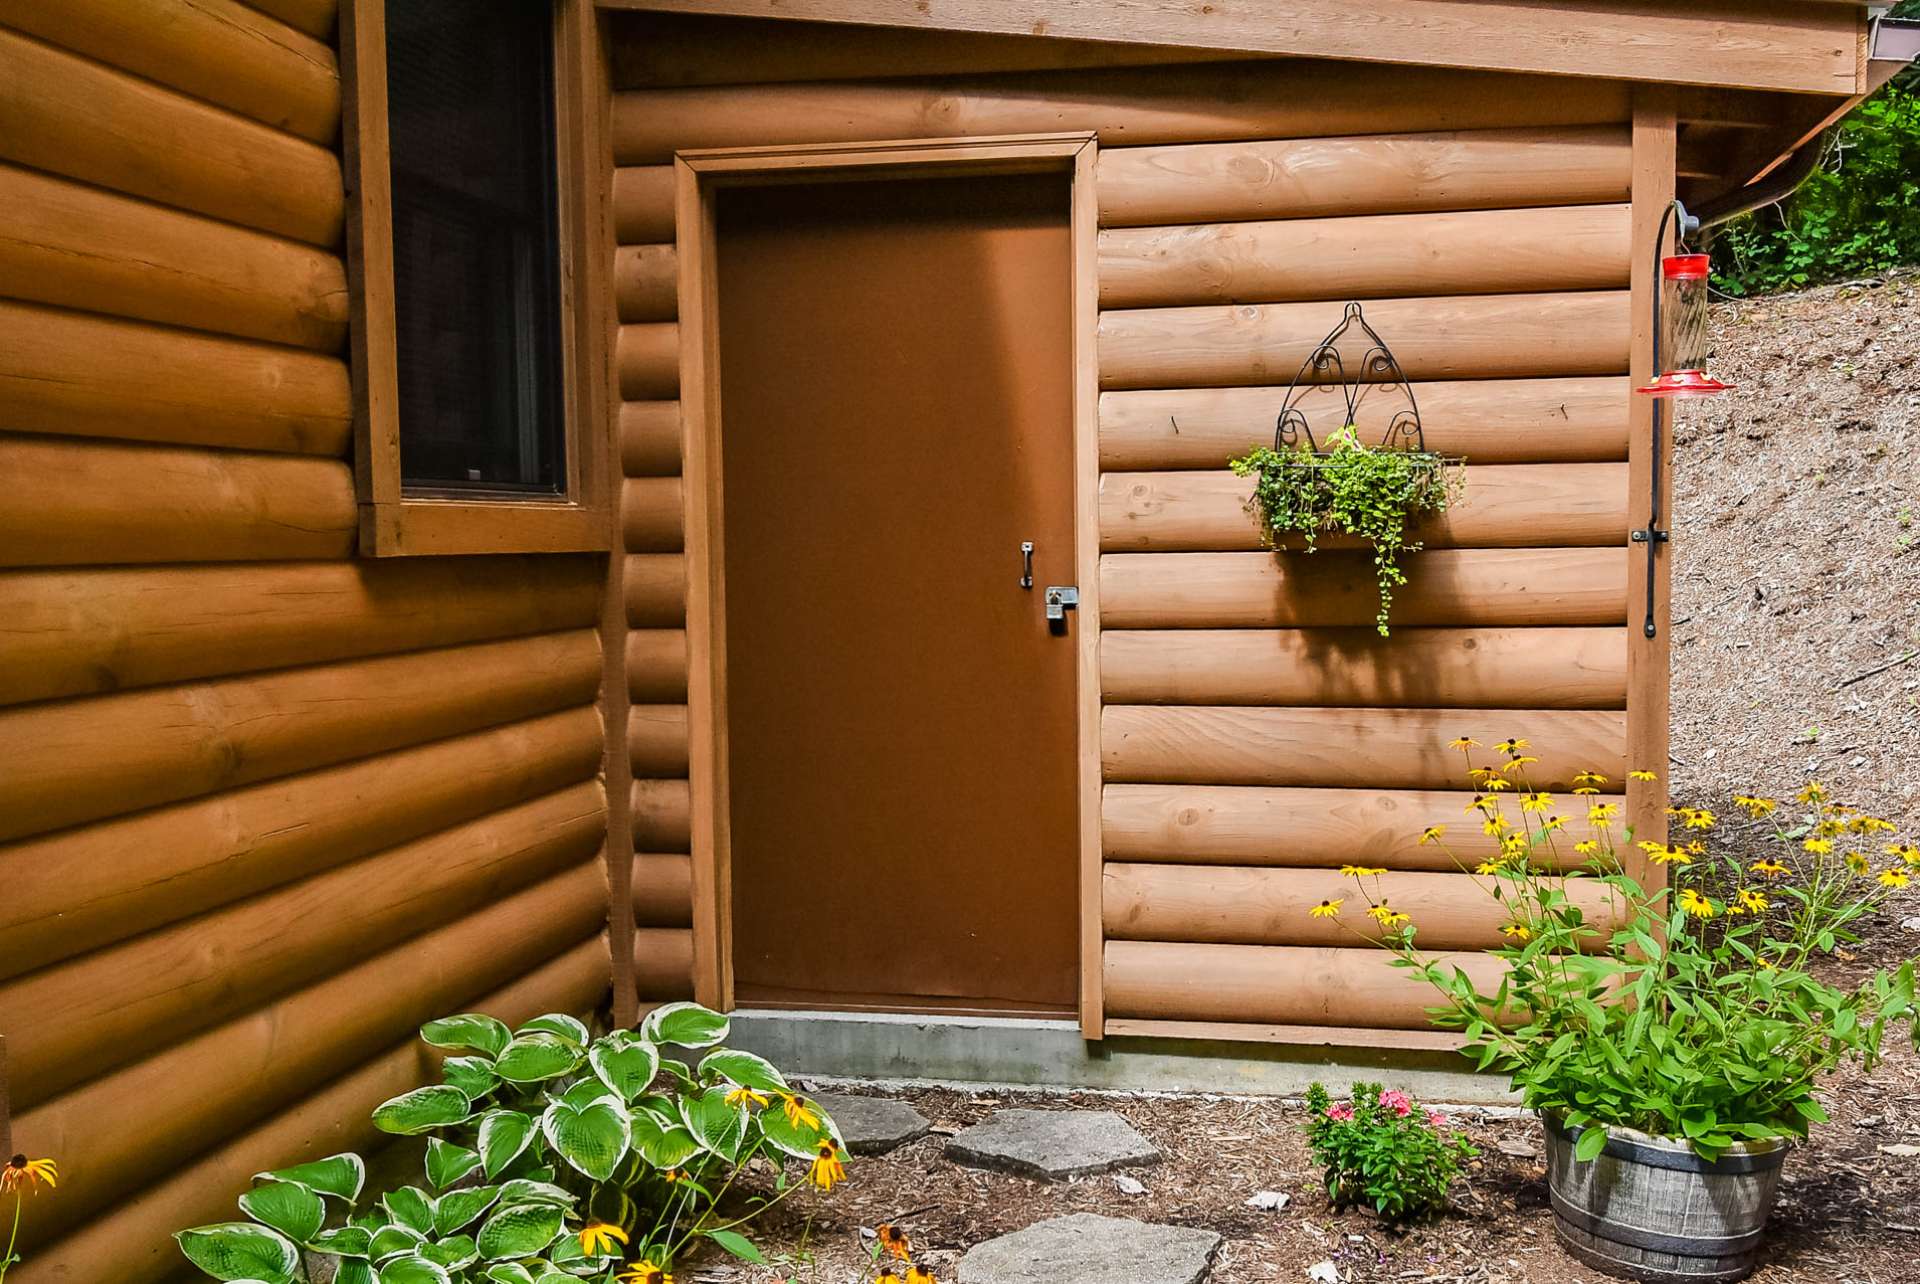 Additional storage space is provided by an attached shed, perfect for your landscaping tools.